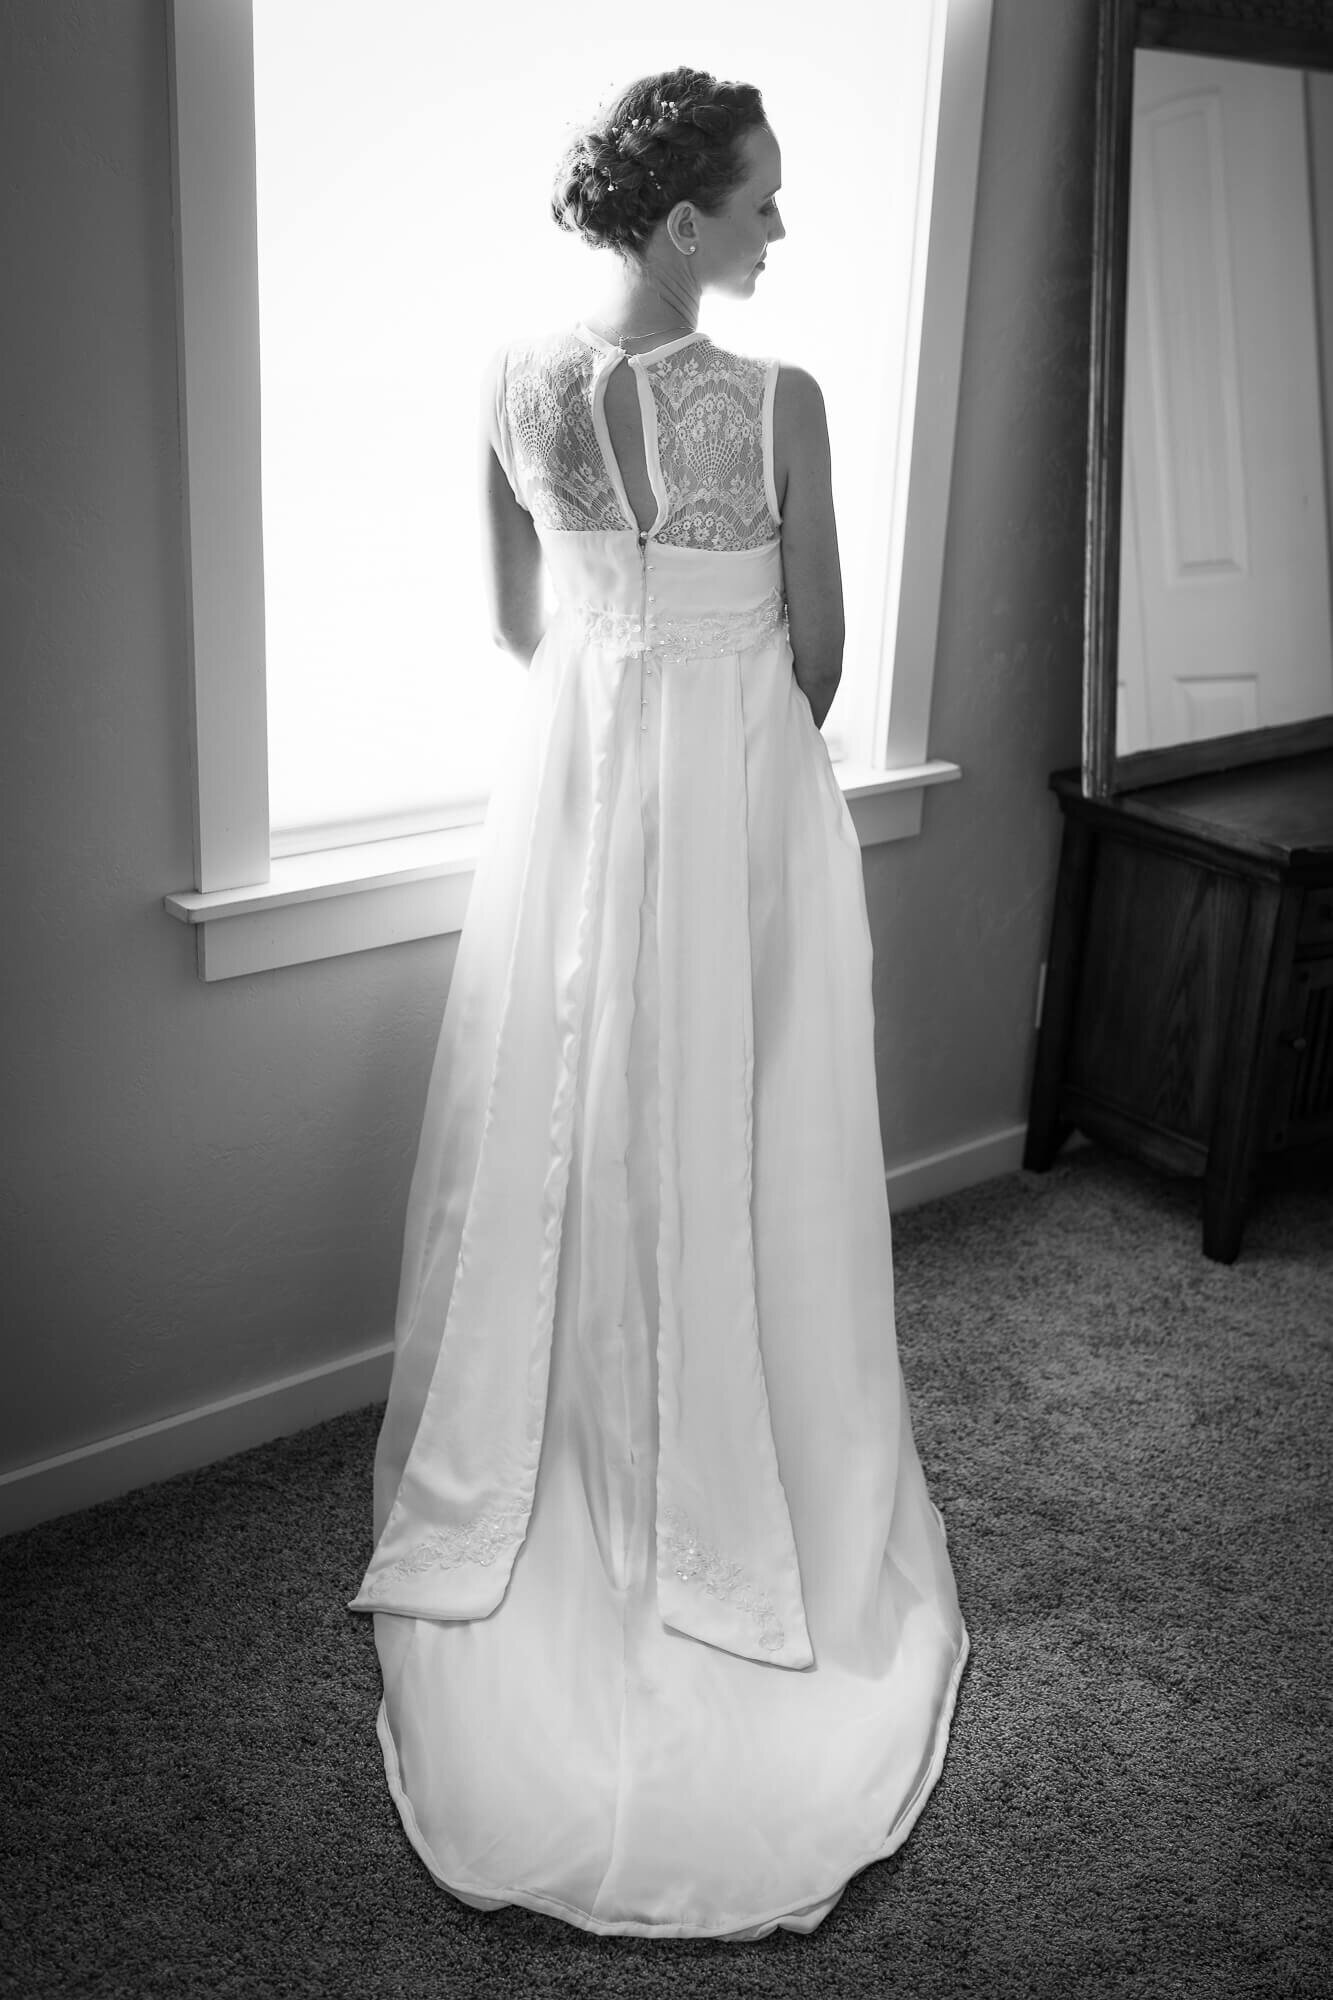 Bridal Portrait standing in front of a window